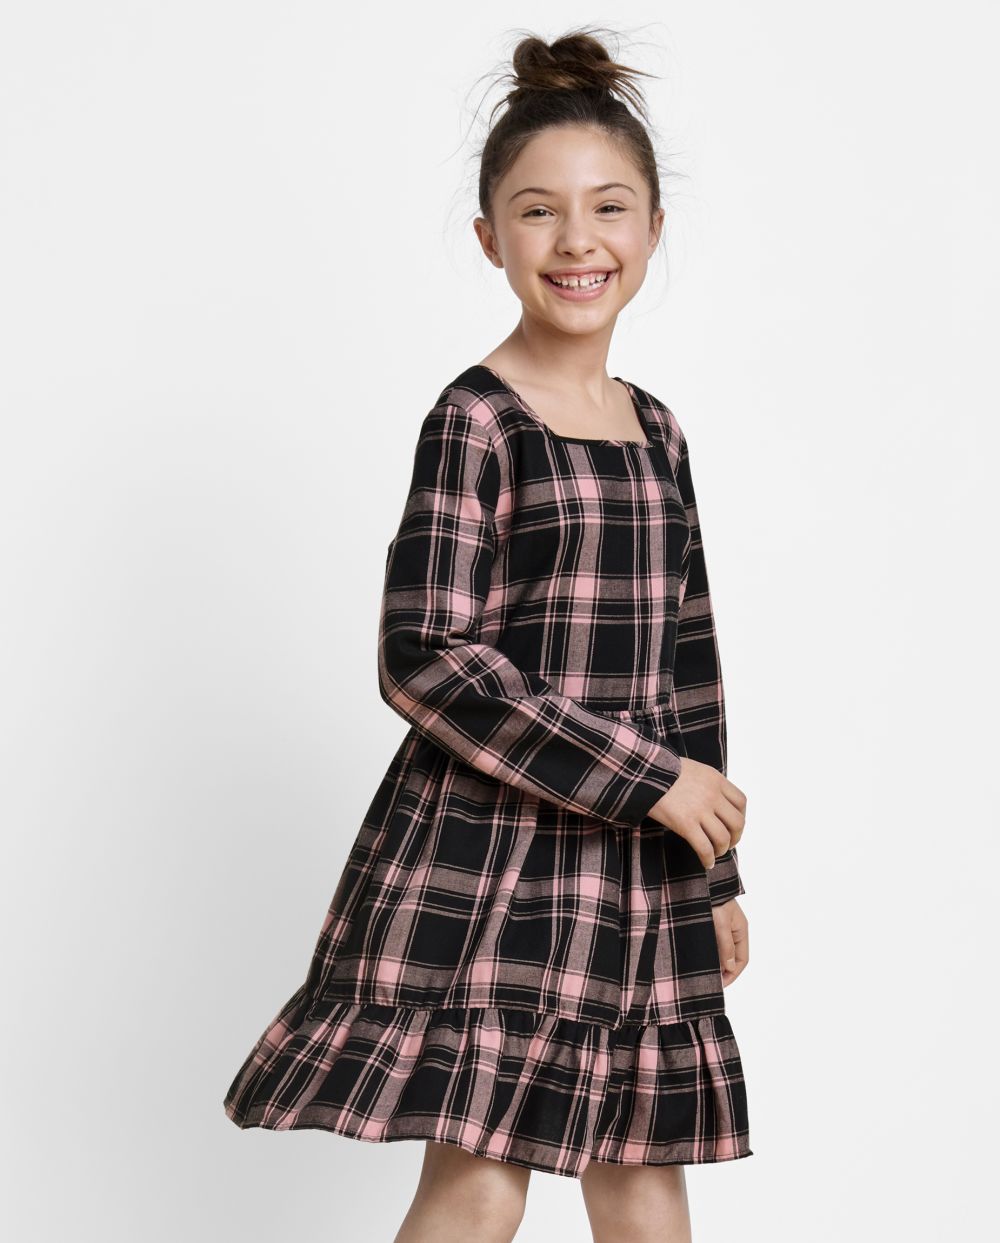 Girls Above the Knee Square Neck Tiered Long Sleeves Plaid Print Dress